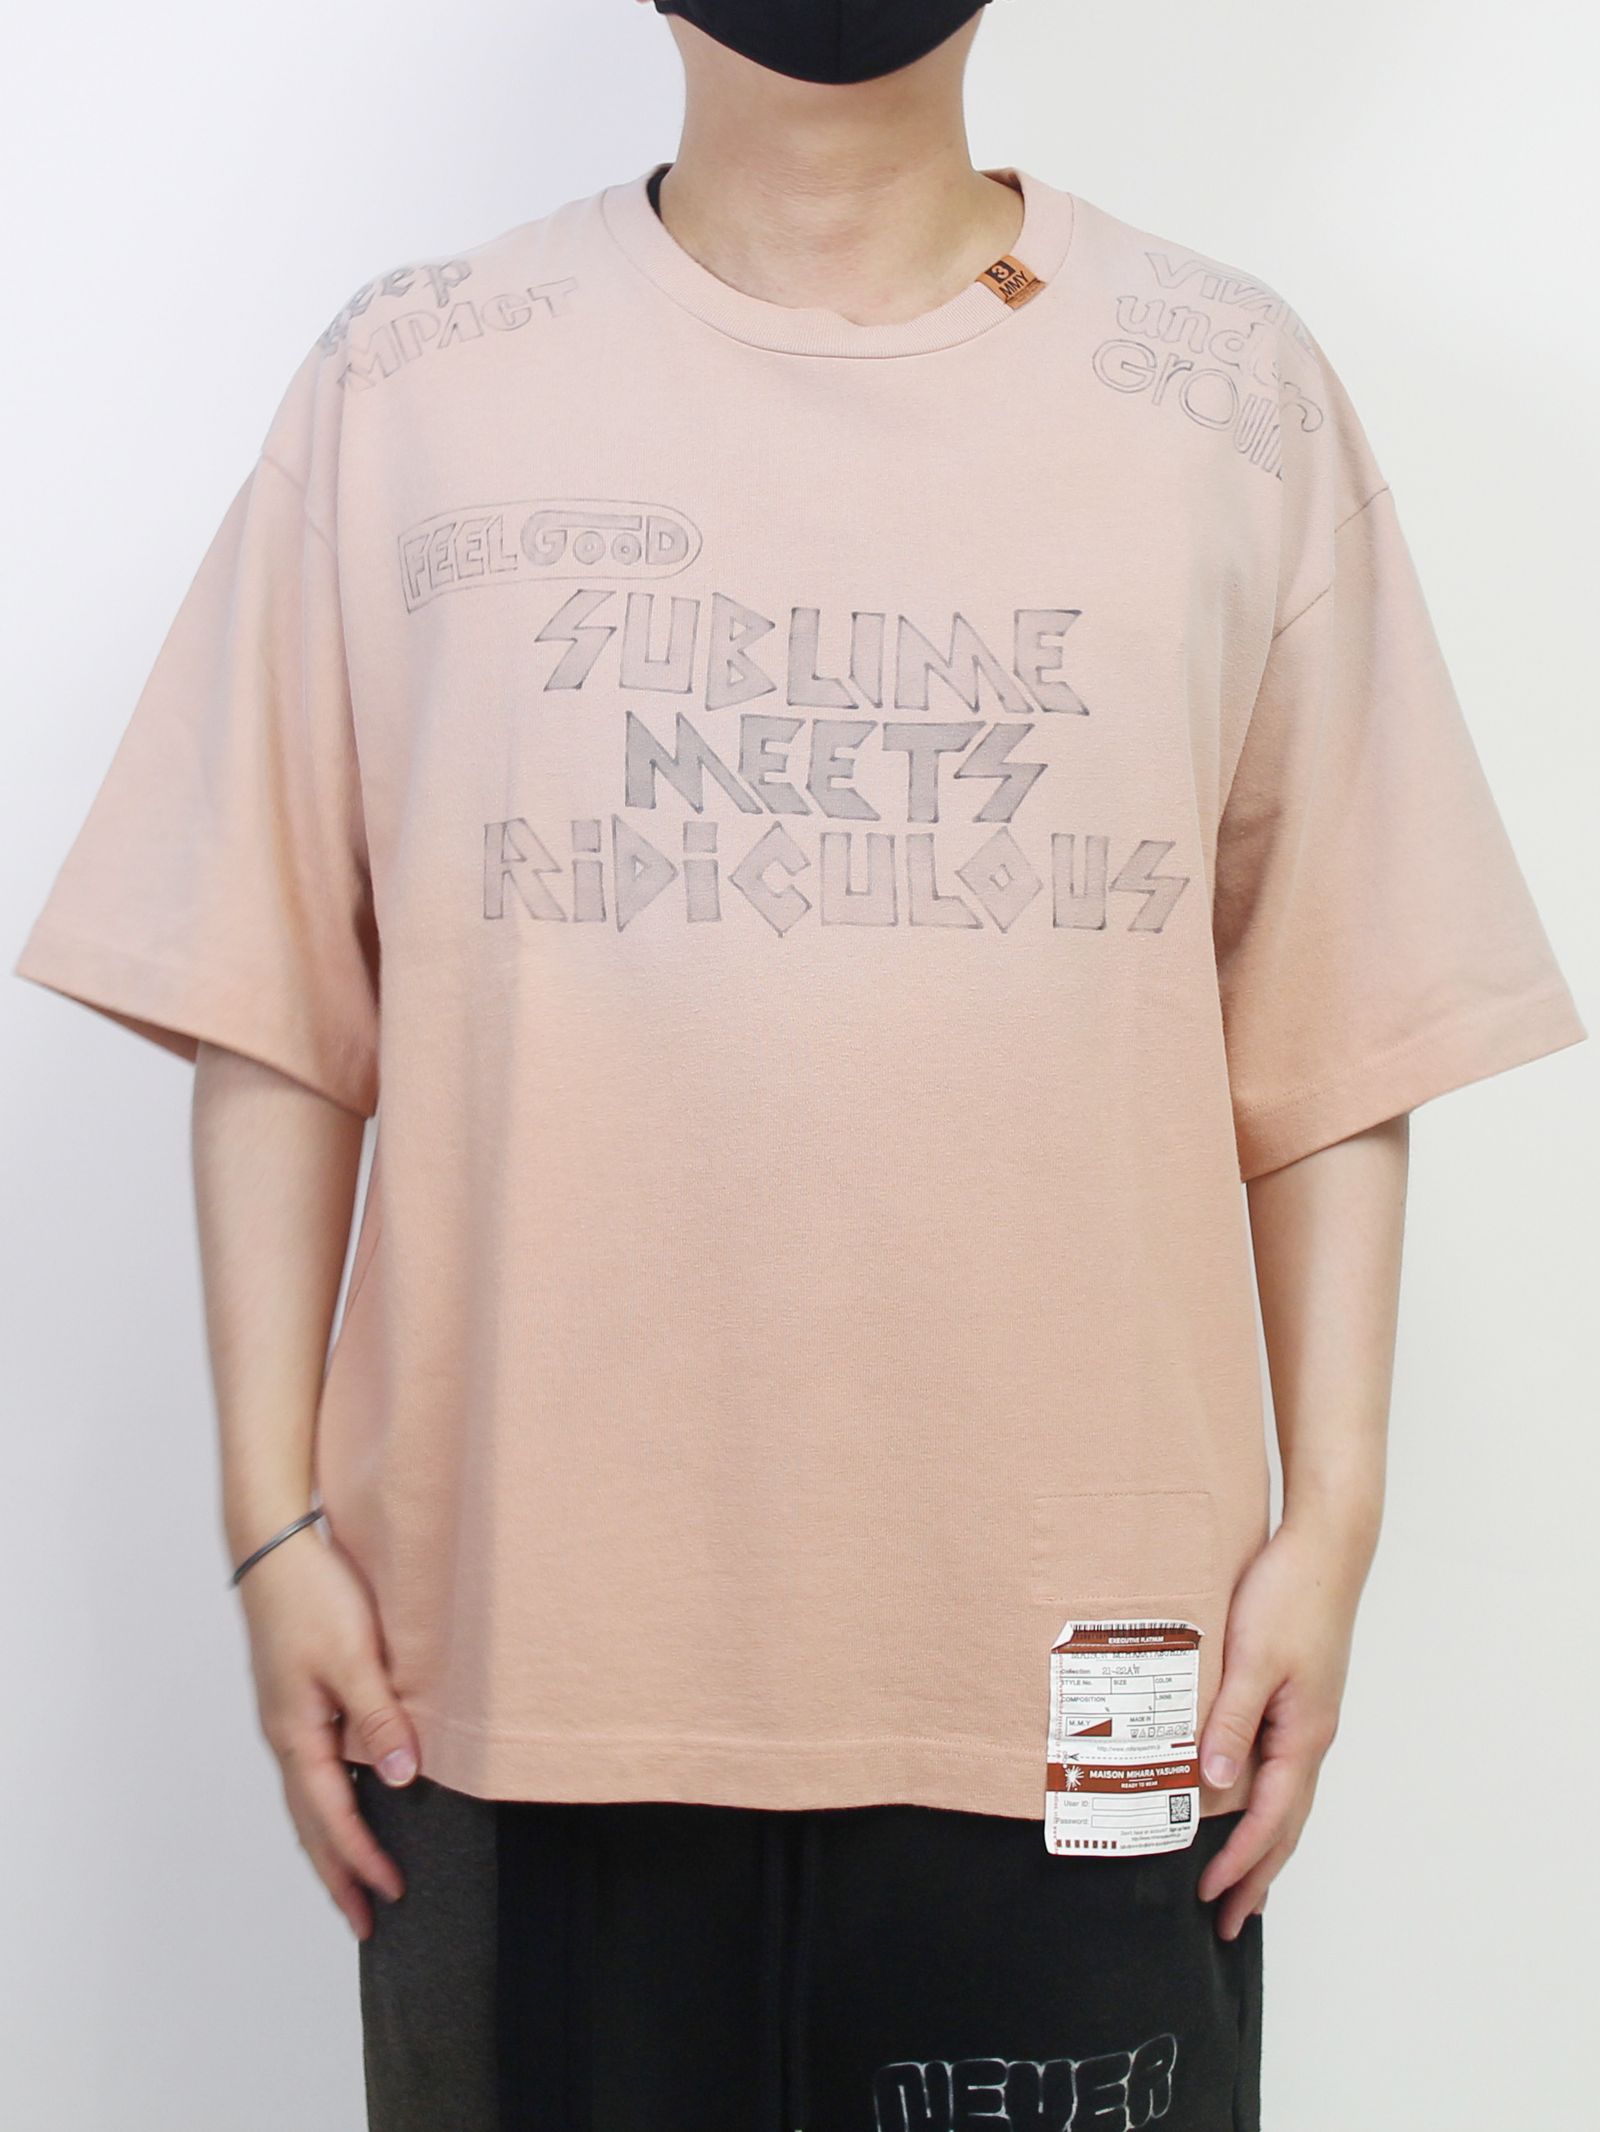 S.M.R Printed T-shirt - プリントTシャツ - PINK - 44(S)